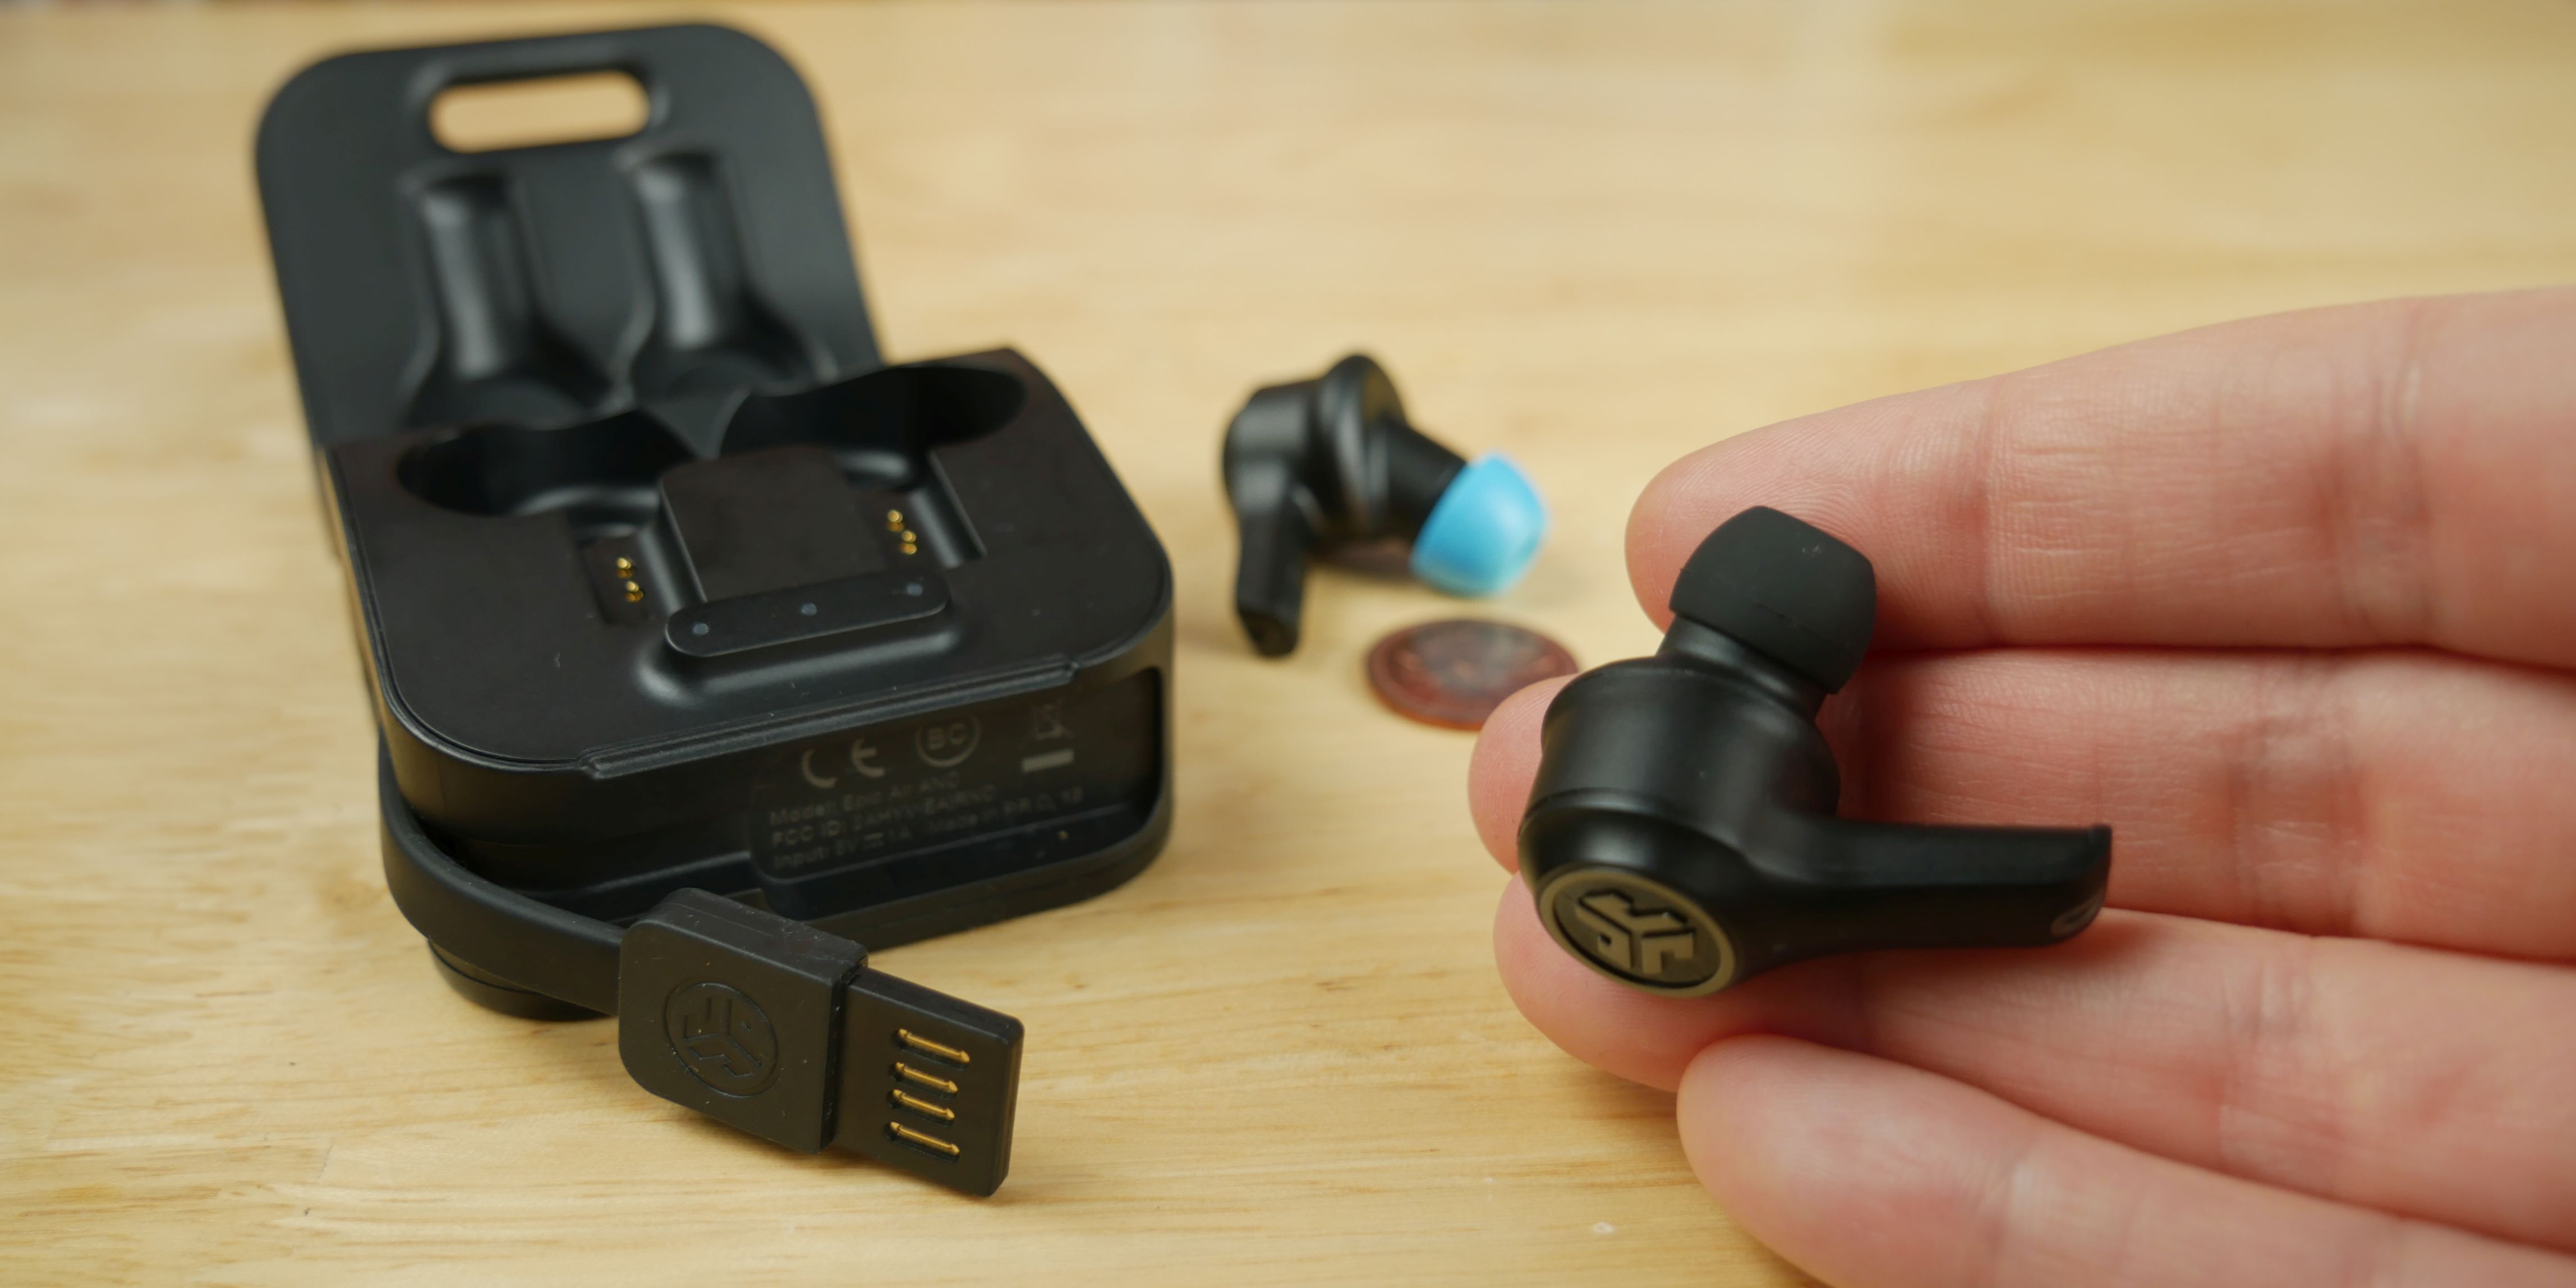 Holding an Epic Air ANC earbud in one hand with charging case and other earbud in the background.